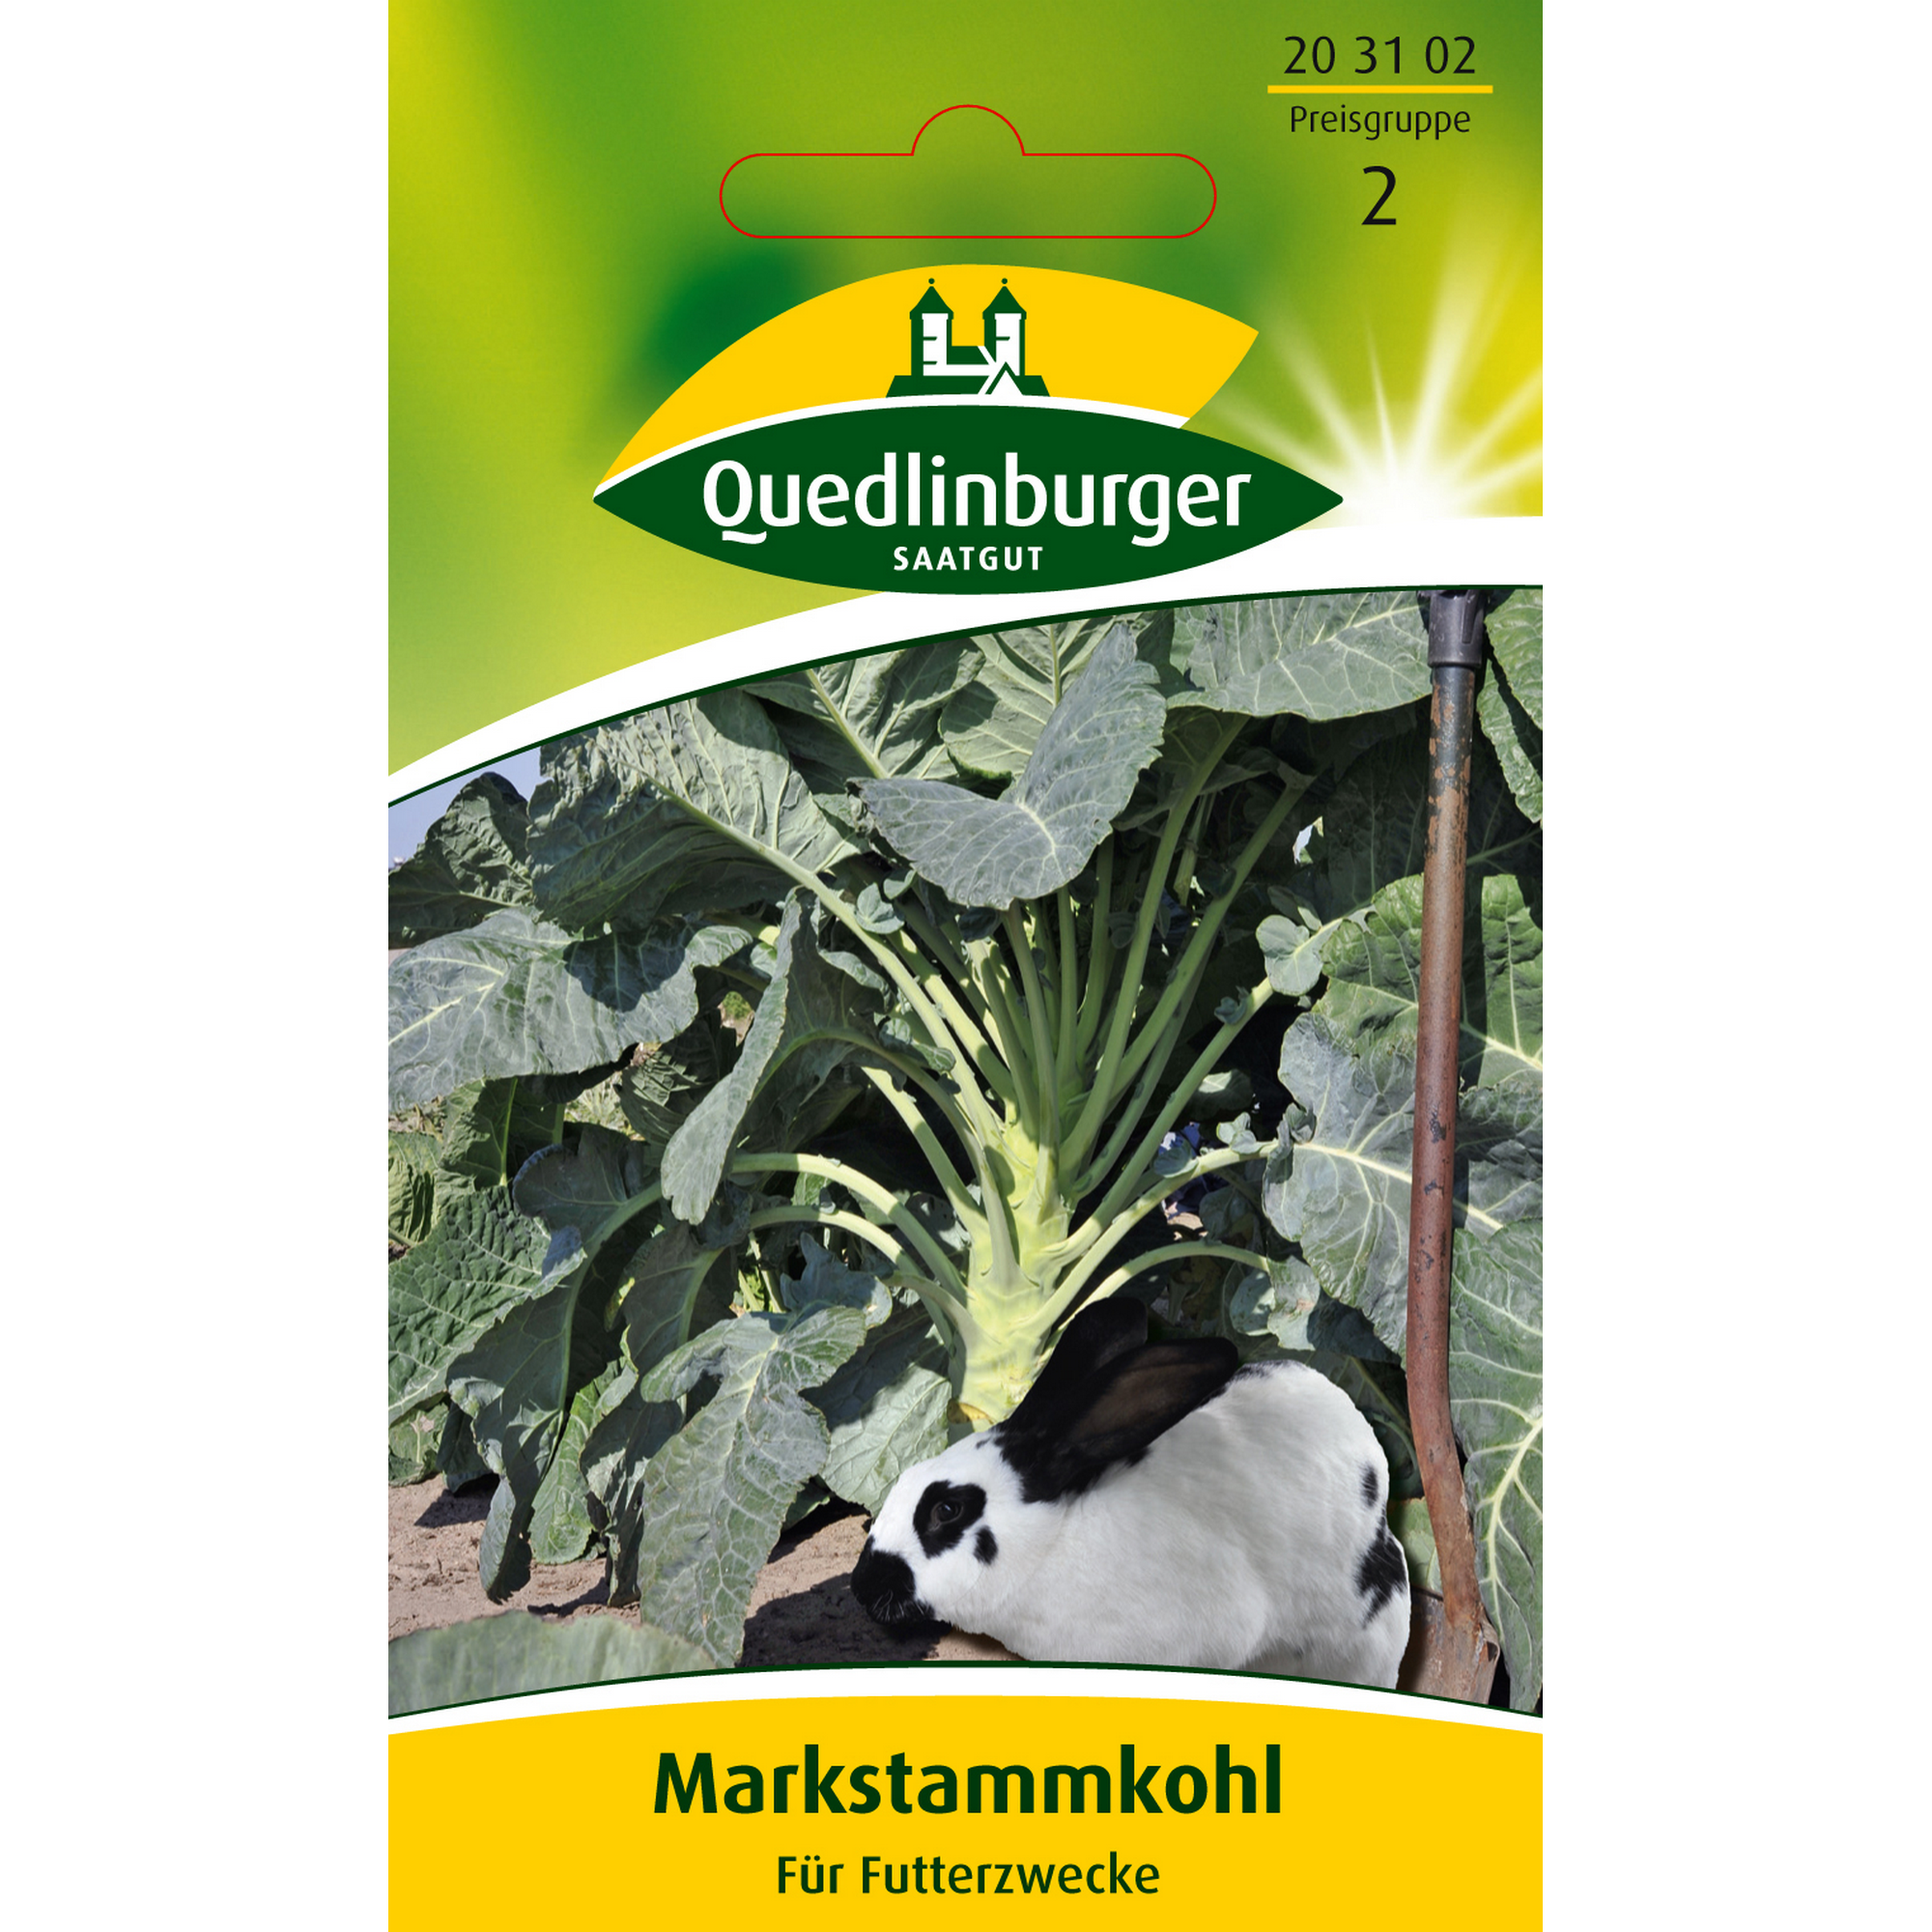 Futterkohl Markstammkohl + product picture